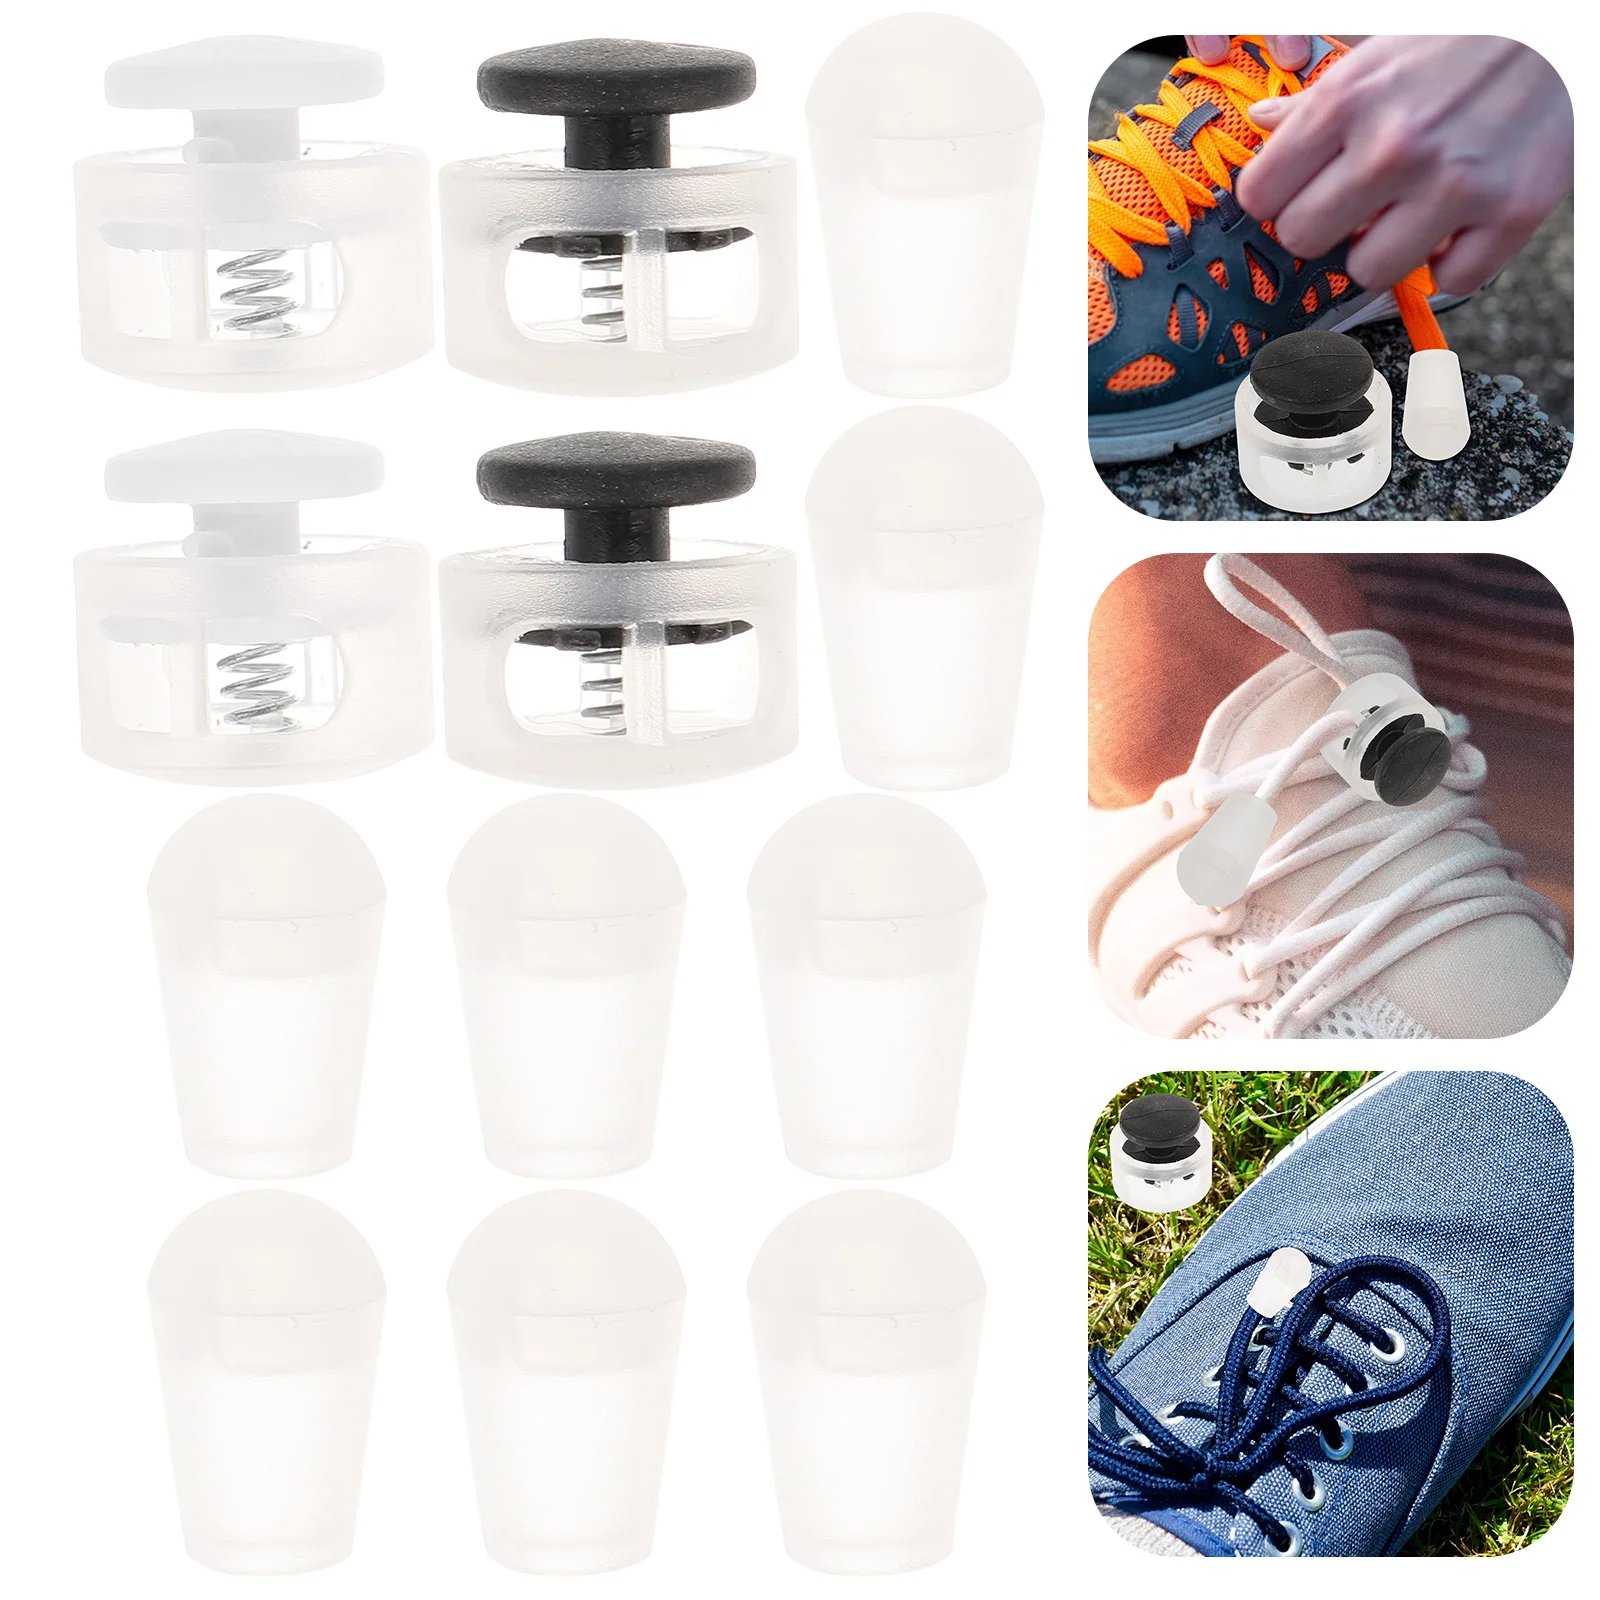 

4 Pairs Elastic Shoe Lace Shoelace Locks for Shoes Holder Laces Buckle Fastener Plastic Locking Clips Cord End